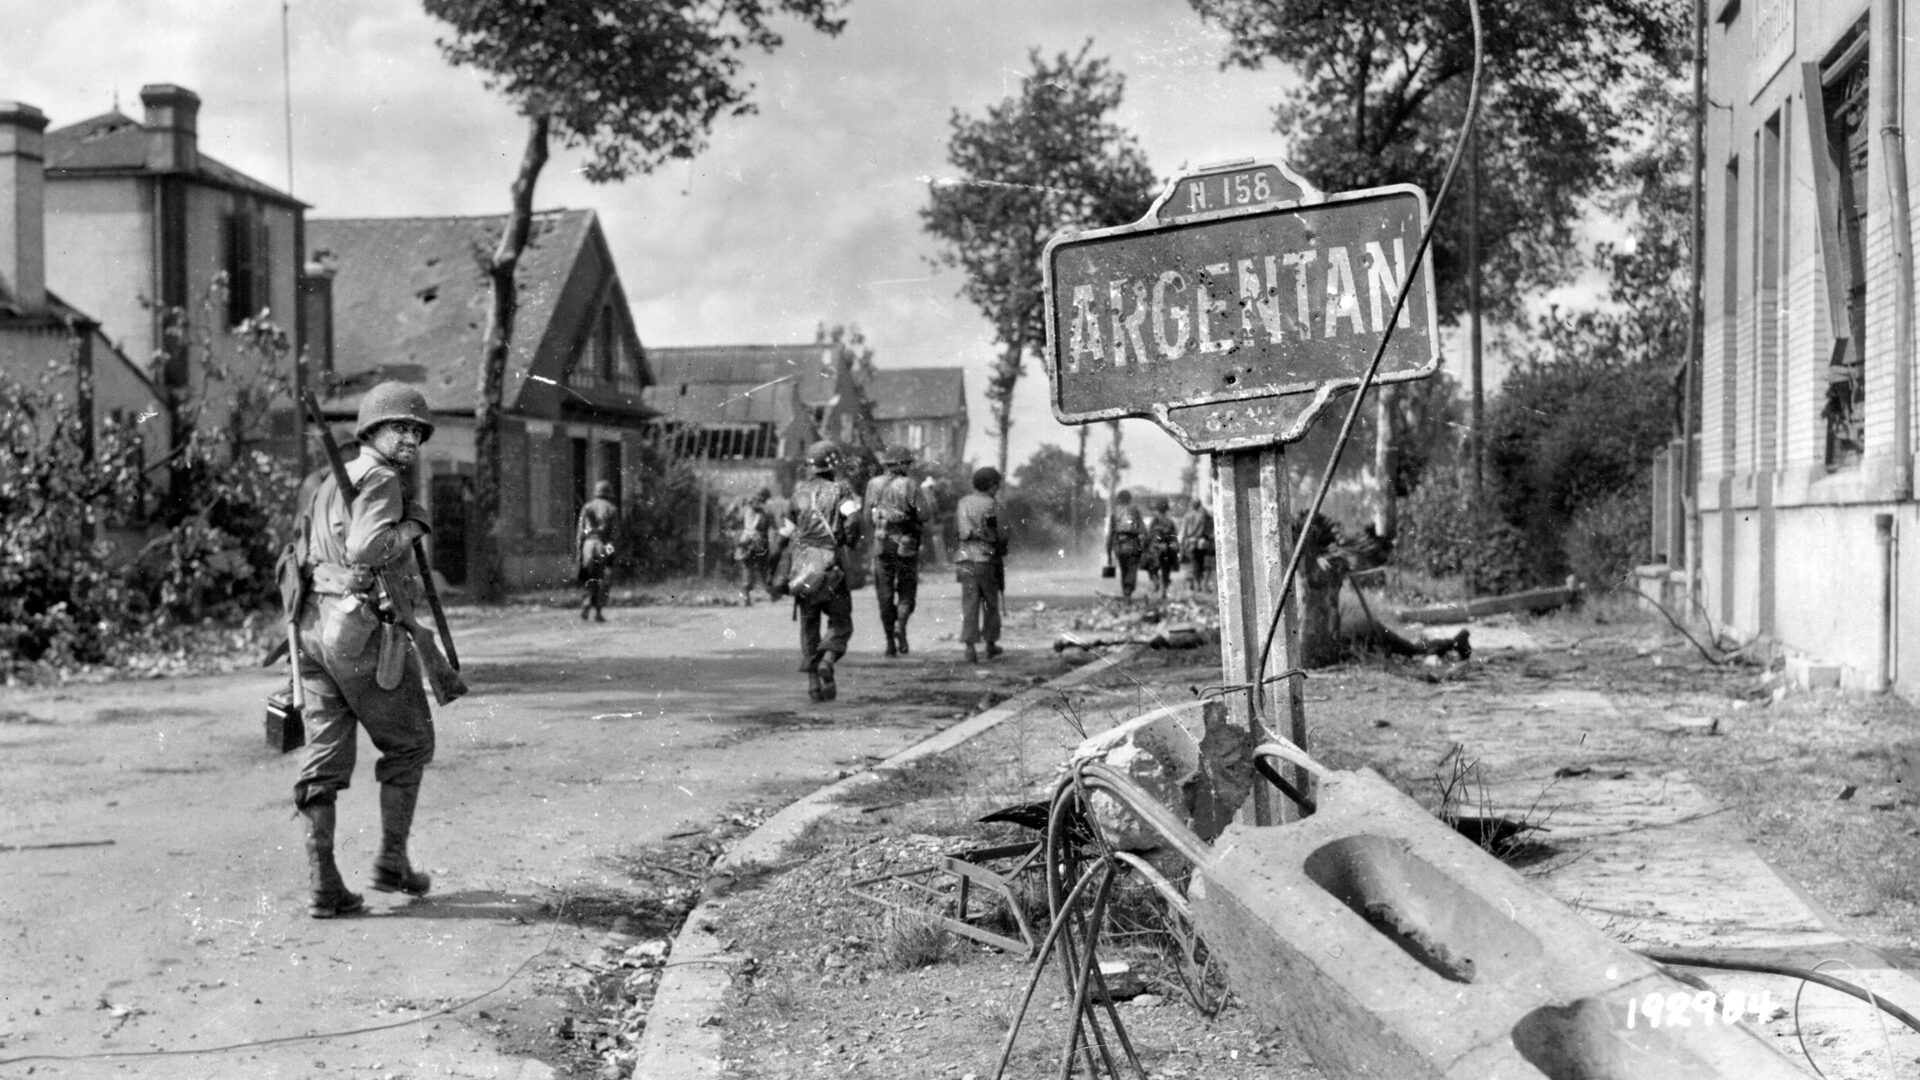 American infantrymen enter the war-ravaged French town of Argentan during the effort to trap thousands of retreating German troops in the Falaise Pocket during the final stages of the Normandy Campaign in 1944. The fighting around Argentan was the baptism of fire for the U.S. 80th Infantry Division.